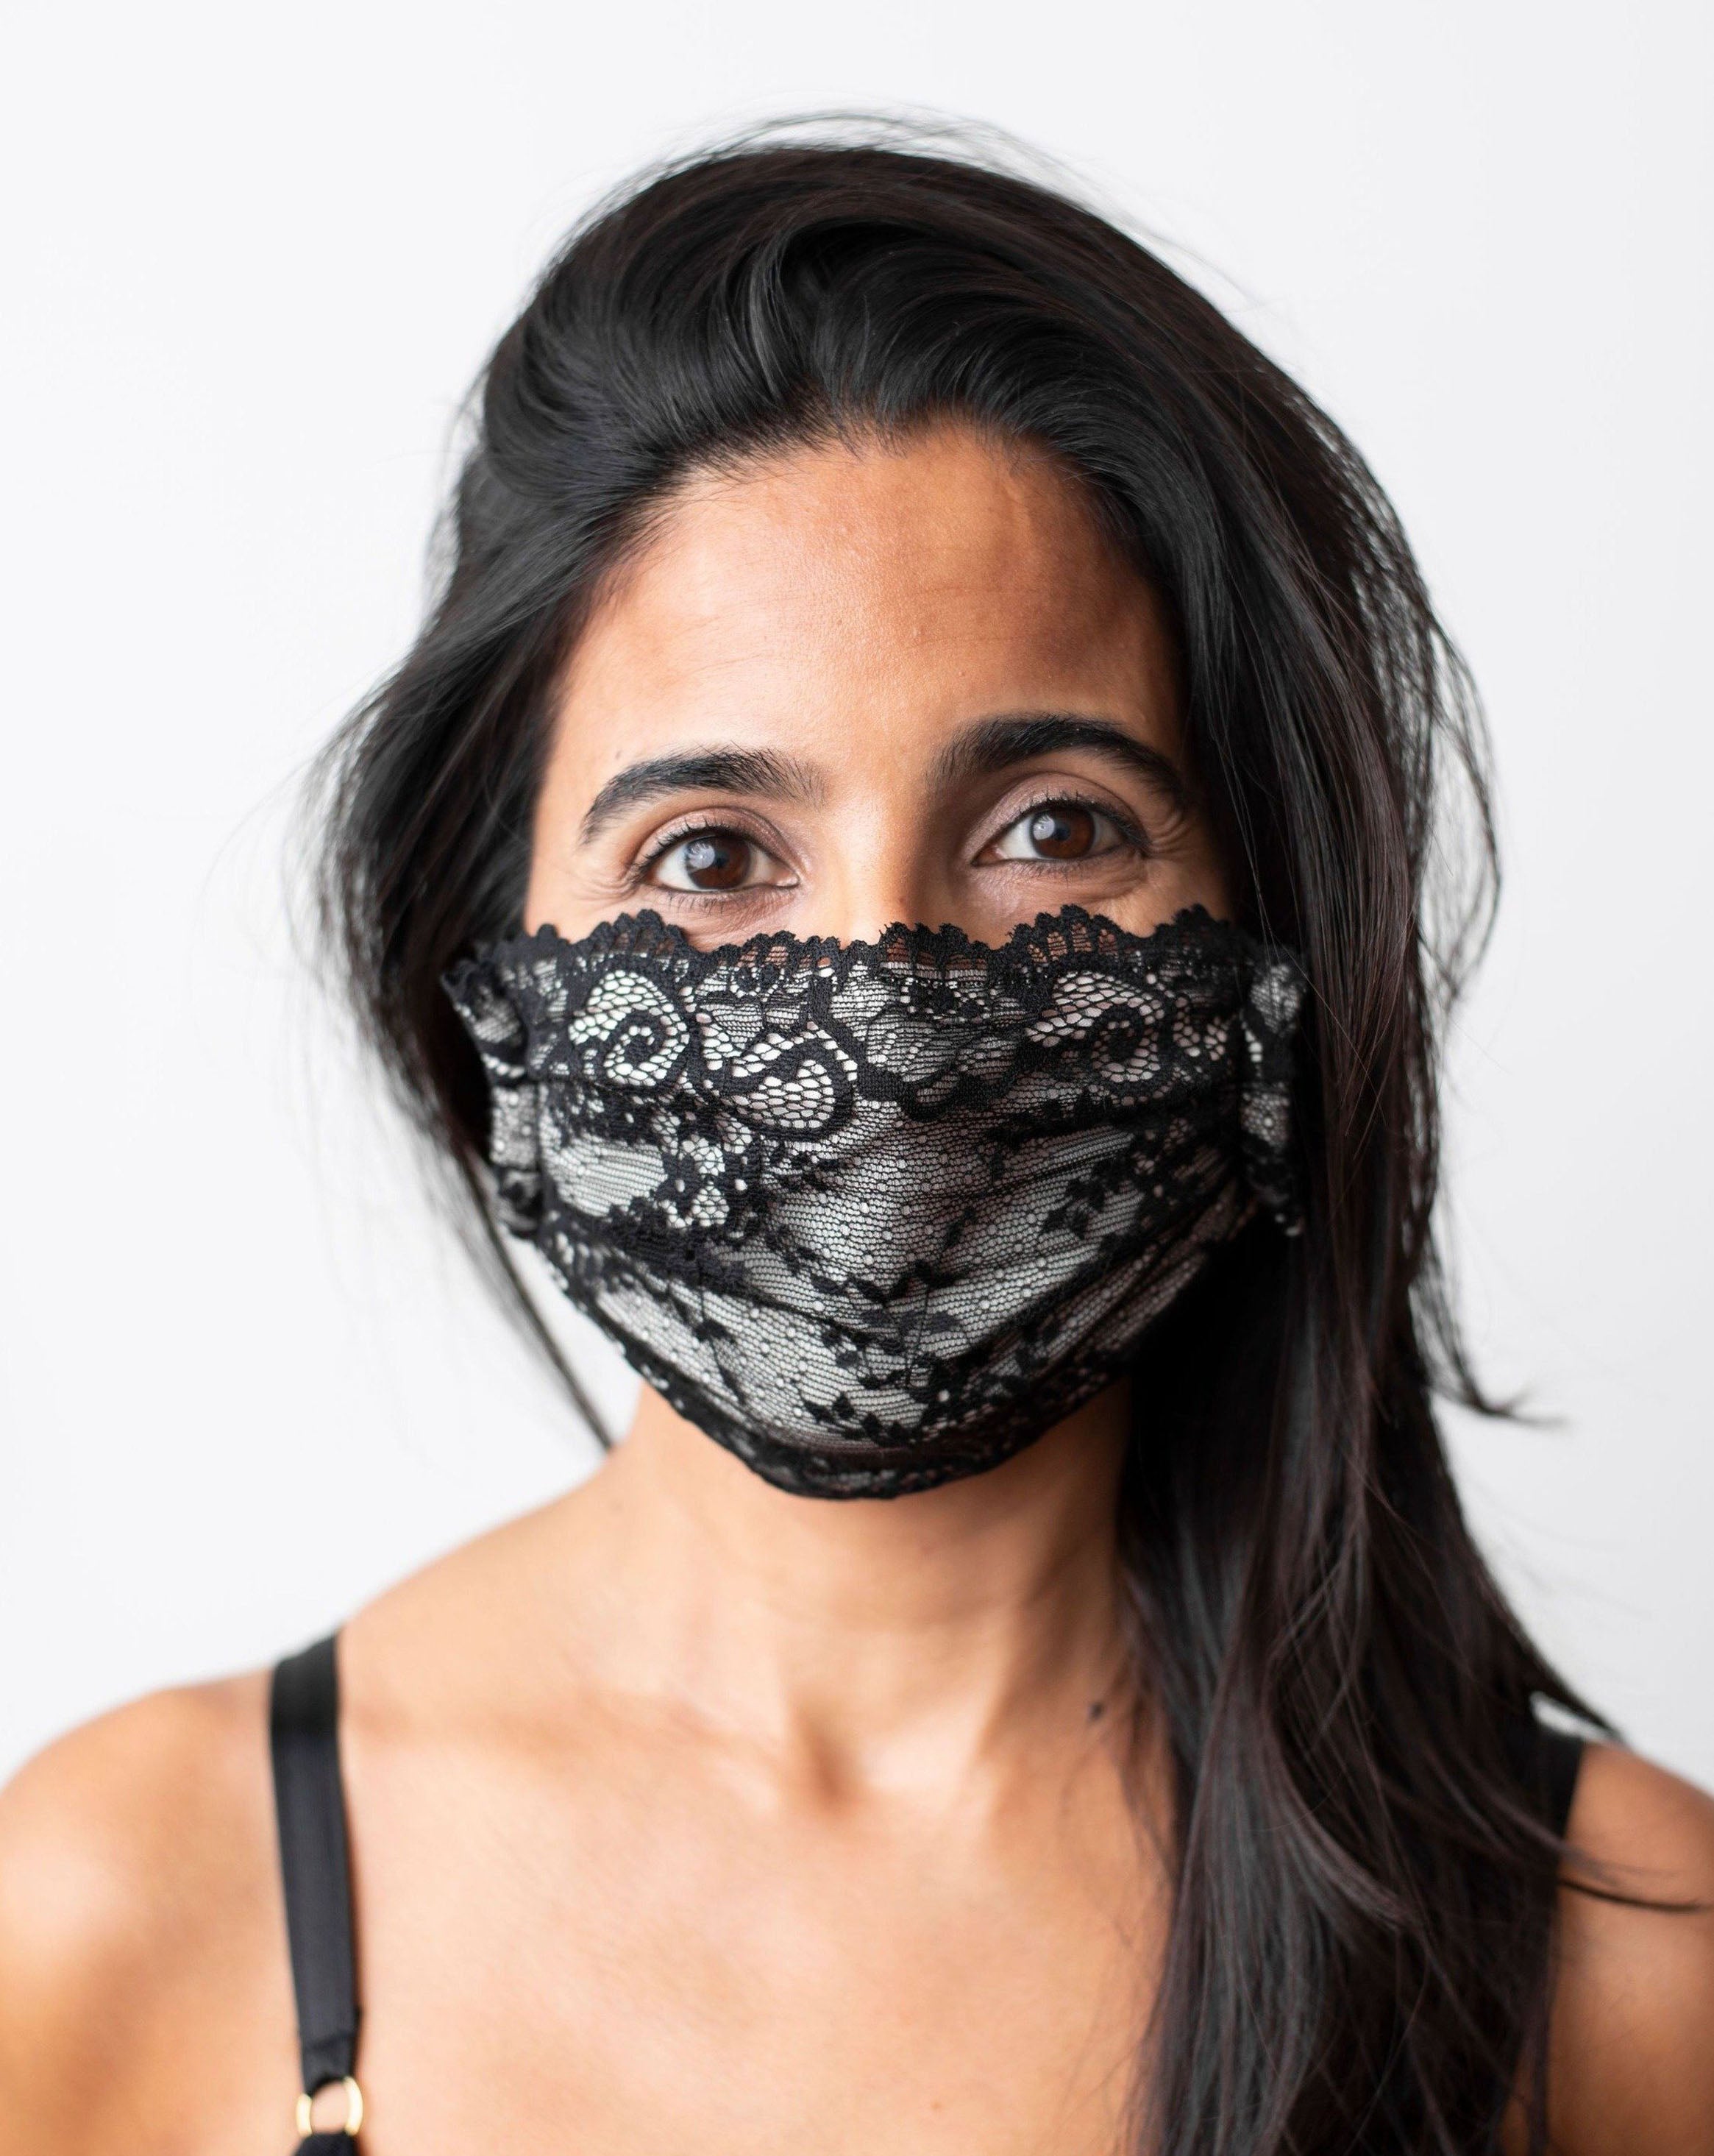 Buy The Best Customized Face Masks Online in Pakistan